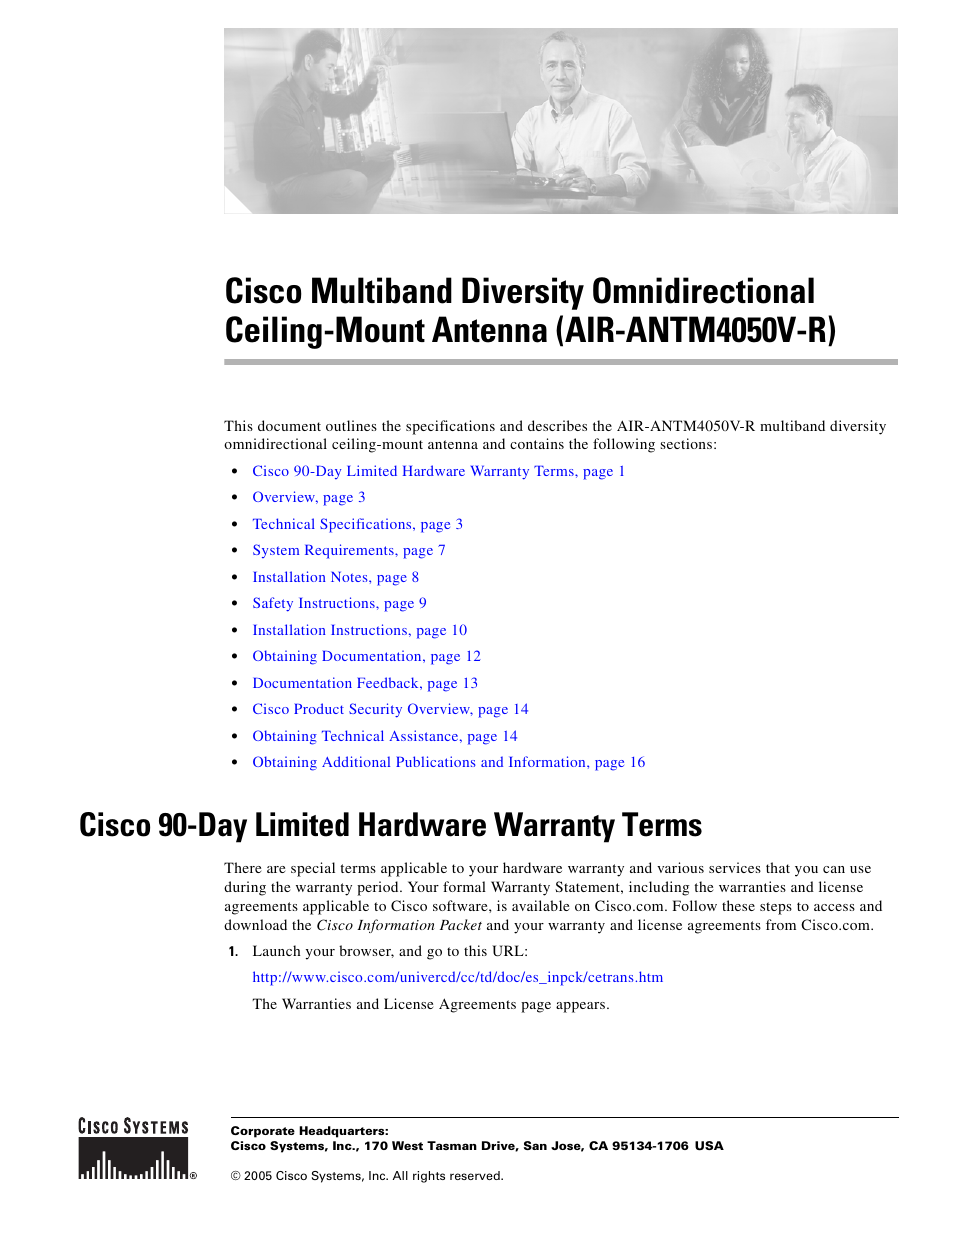 Cisco Multiband Diversity Omnidirectional Ceiling-Mount Antenna AIR-ANTM4050V-R User Manual | 18 pages